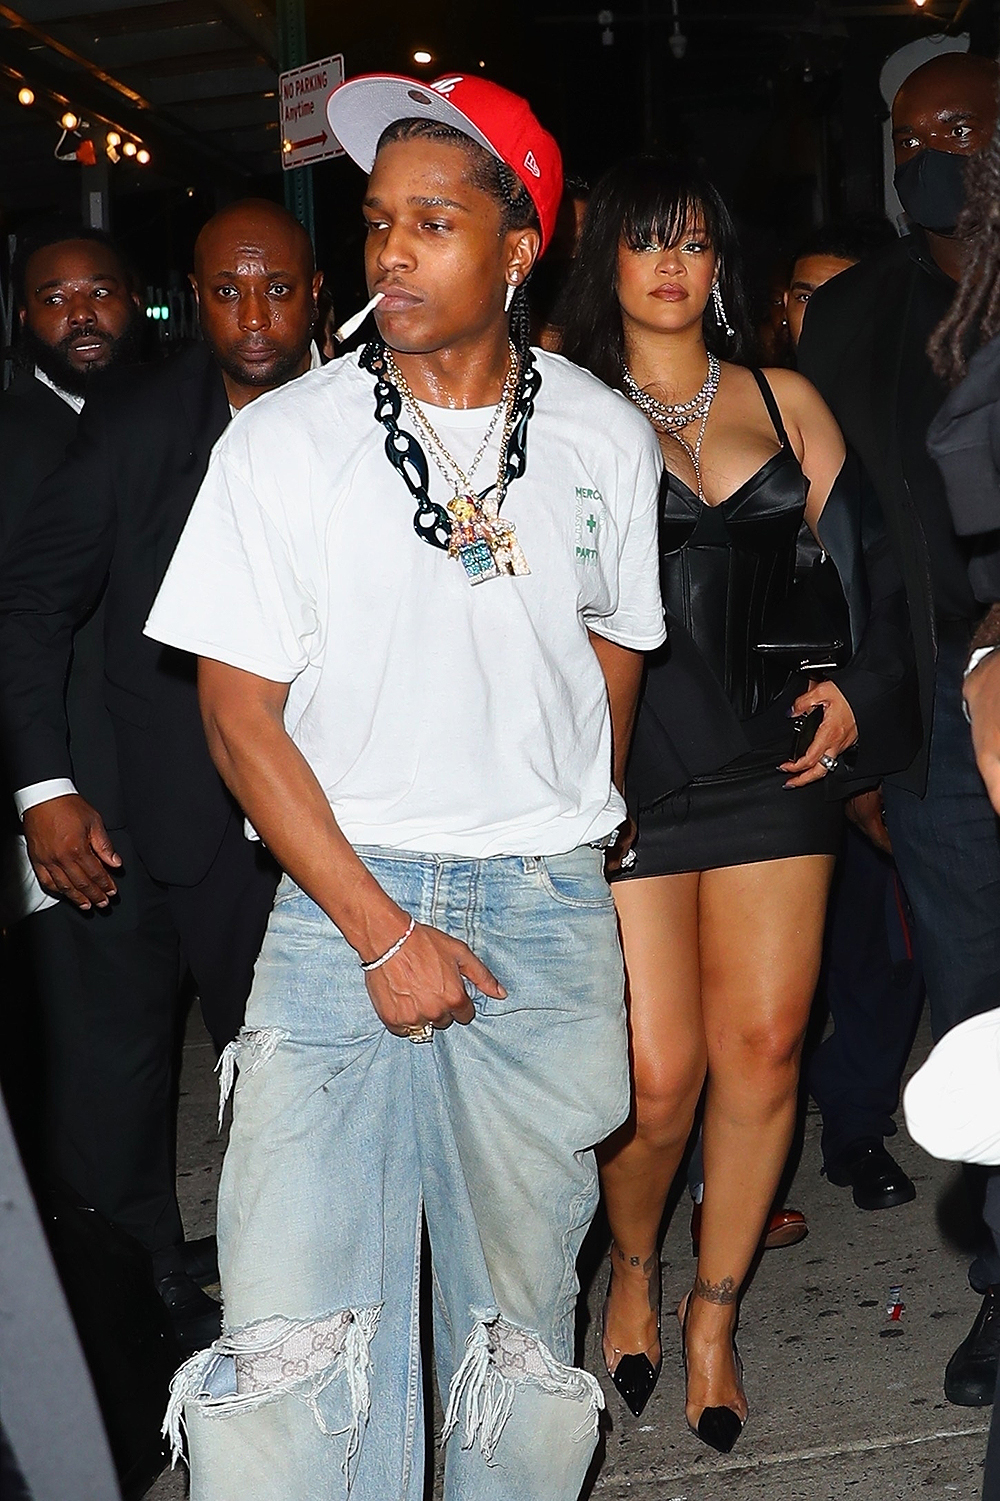 ASAP Rocky Steps Out In A Black Leather Skirt